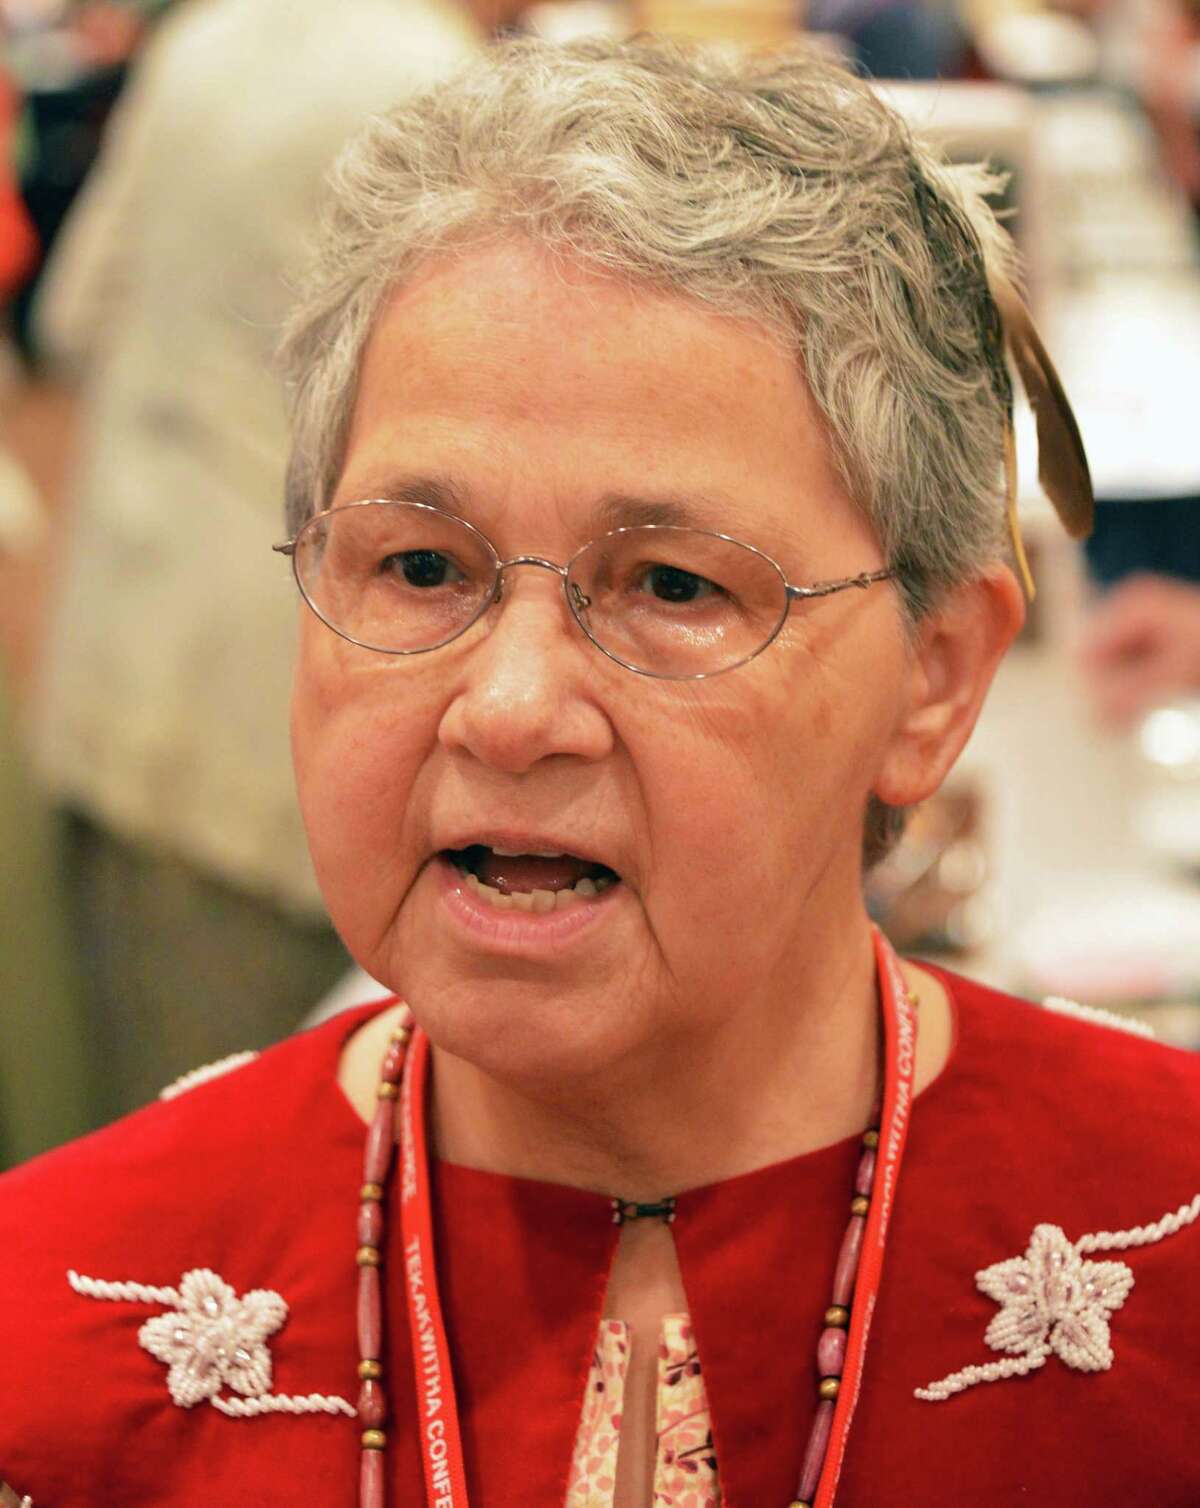 Conference Executive Director Sister Kateri Mitchell, originally from St. Regis and now of Great Falls, Mont., at the 73rd Annual Tekakwitha Conference in Colonie on Thursday, July 19, 2012. (John Carl D'Annibale / Times Union)